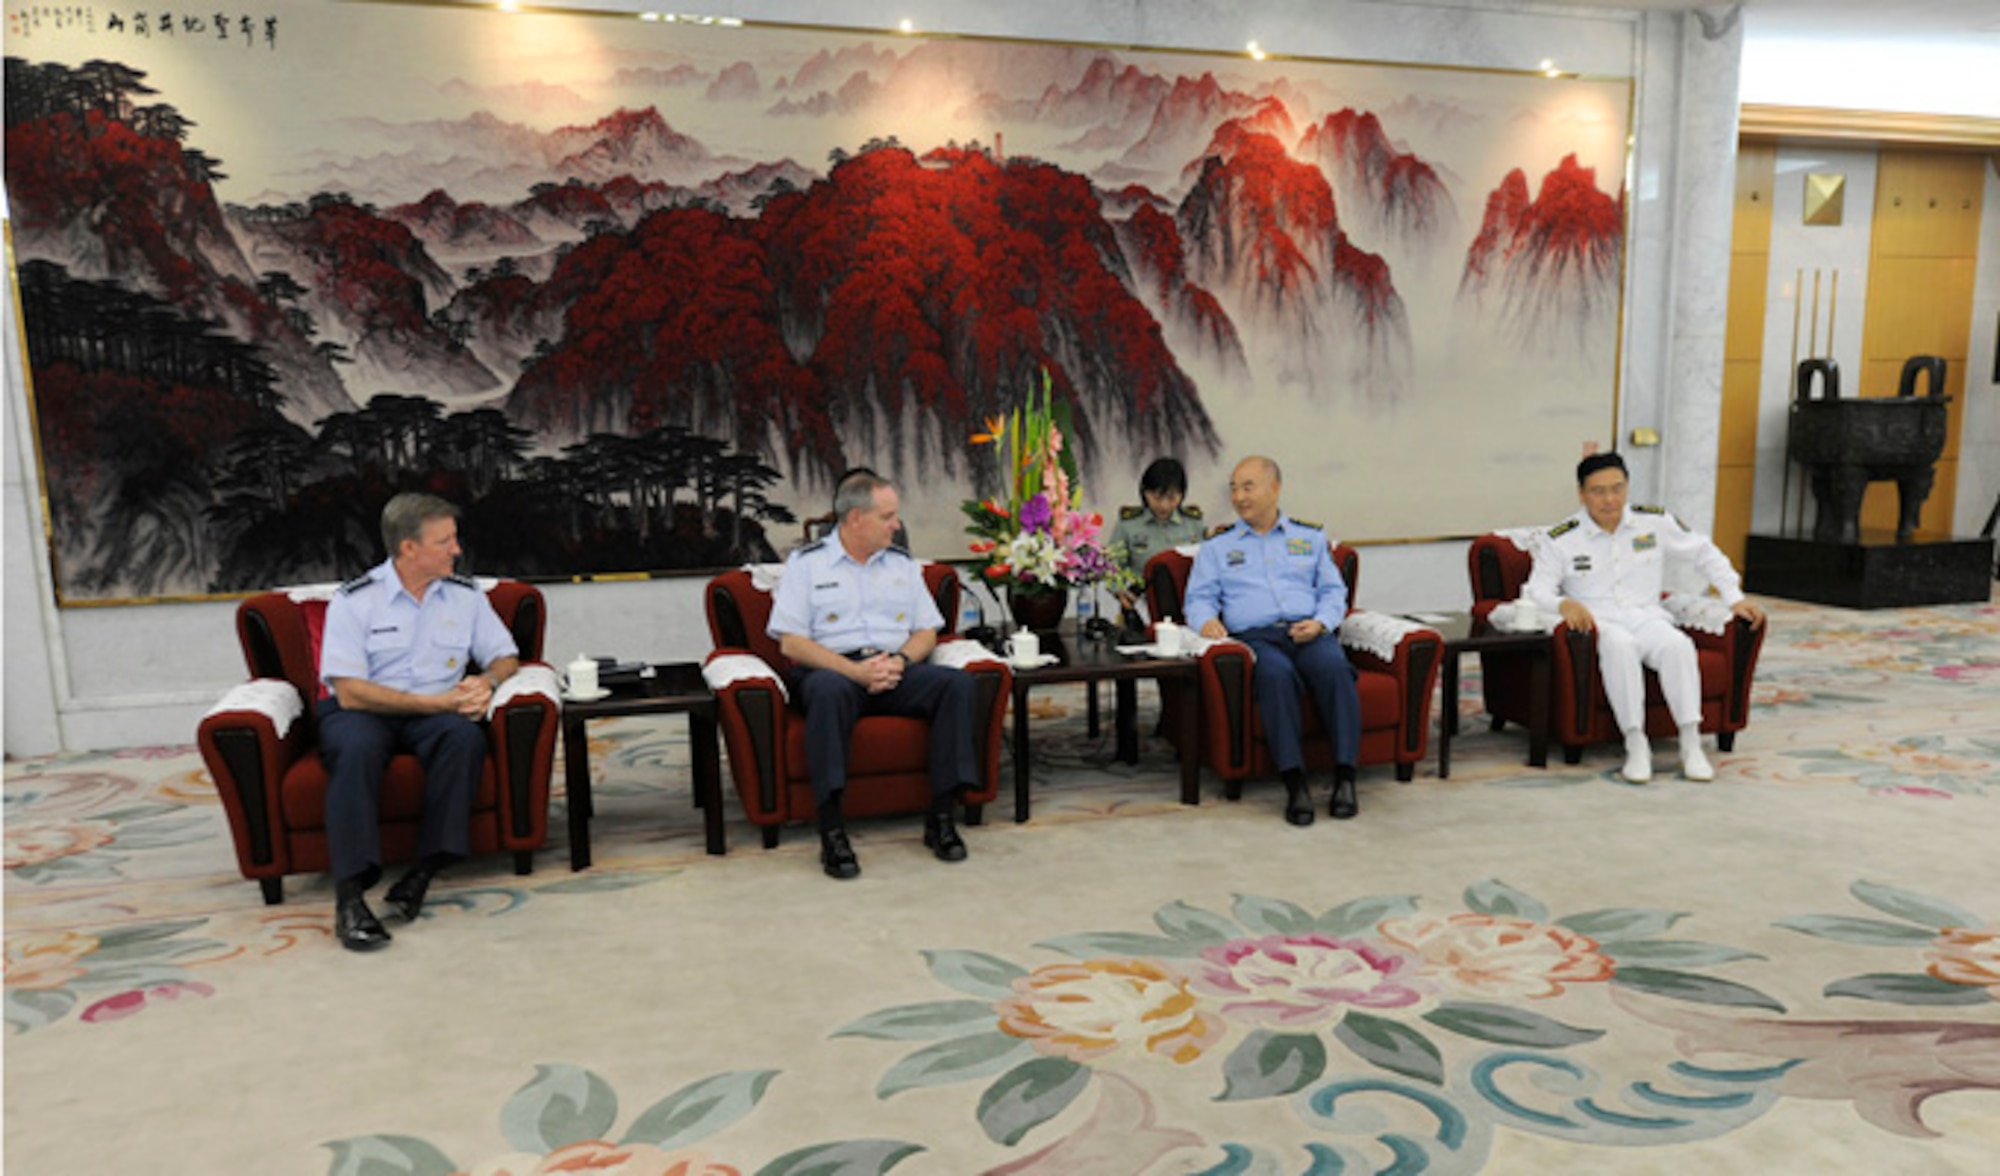 Air Force Chief of Staff Gen. Mark A. Welsh III meets with Vice Chairman of the Central Military Commission Gen. Xu Qiliang Sept. 26, 2013, in Beijing, China. Welsh, along with Gen. "Hawk" Carlisle and Chief Master Sgt. of the Air Force James A. Cody, visited with various military leaders as part of a weeklong visit to the country.